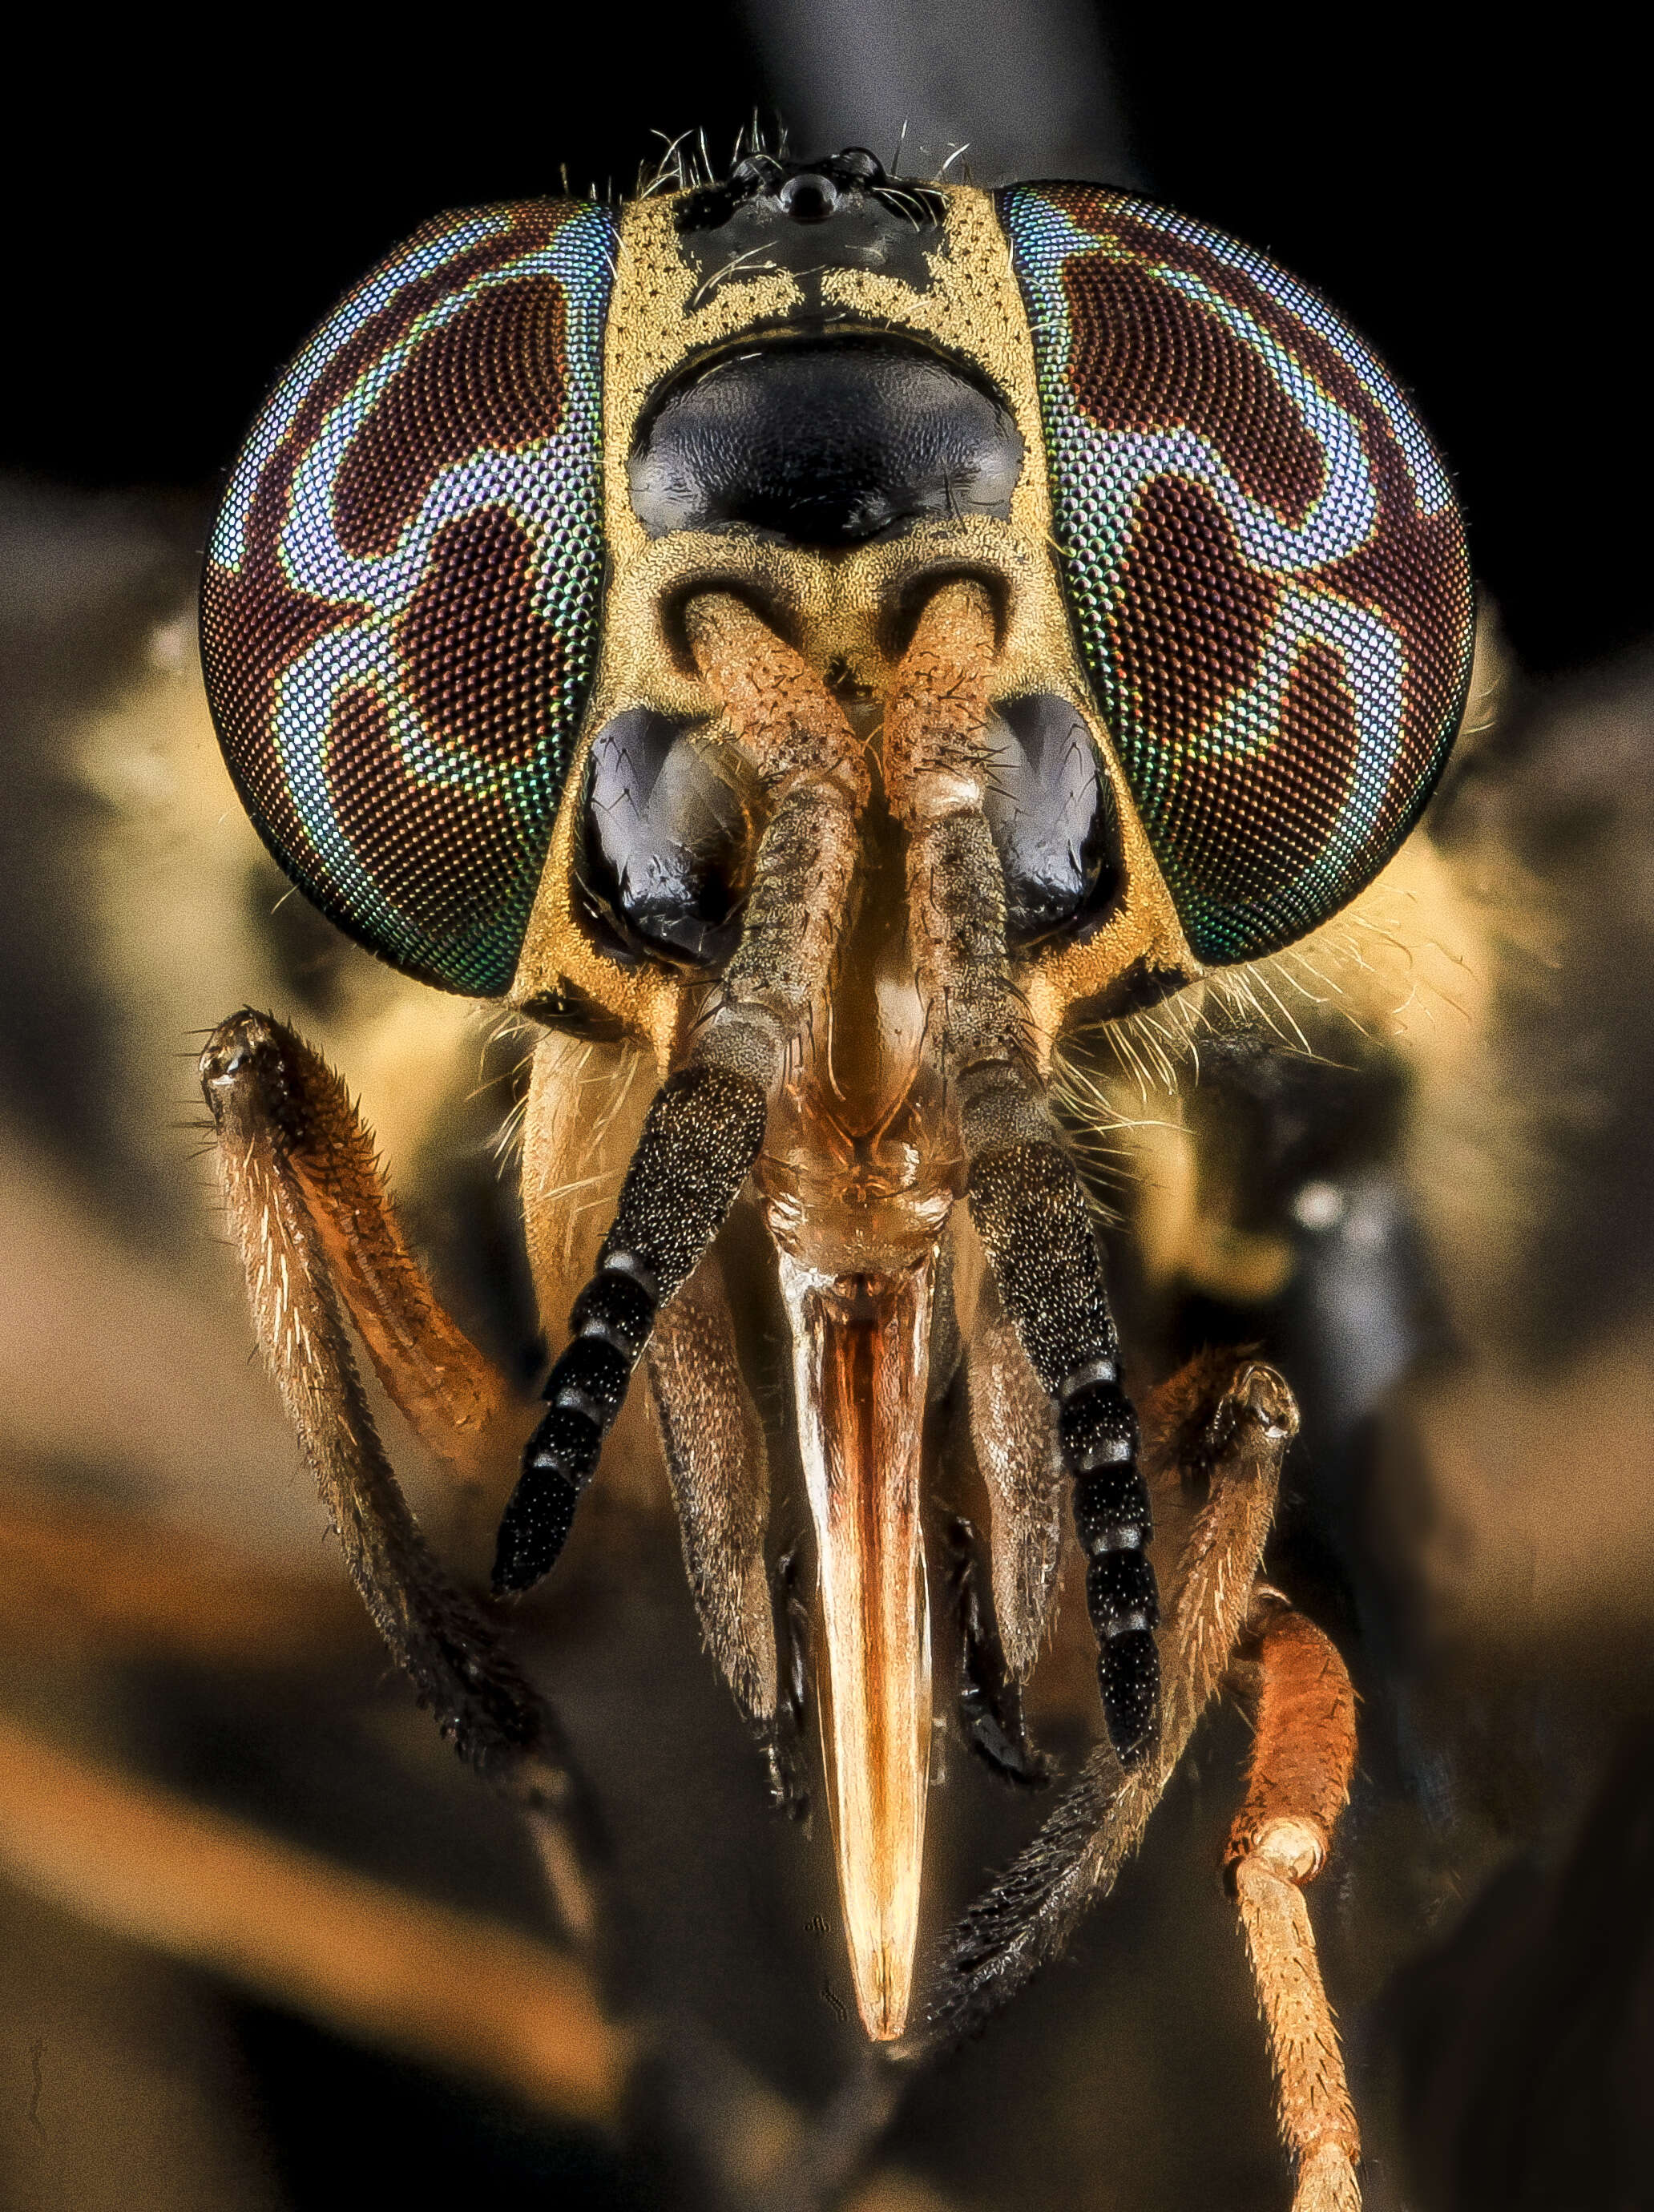 Image of Chrysops